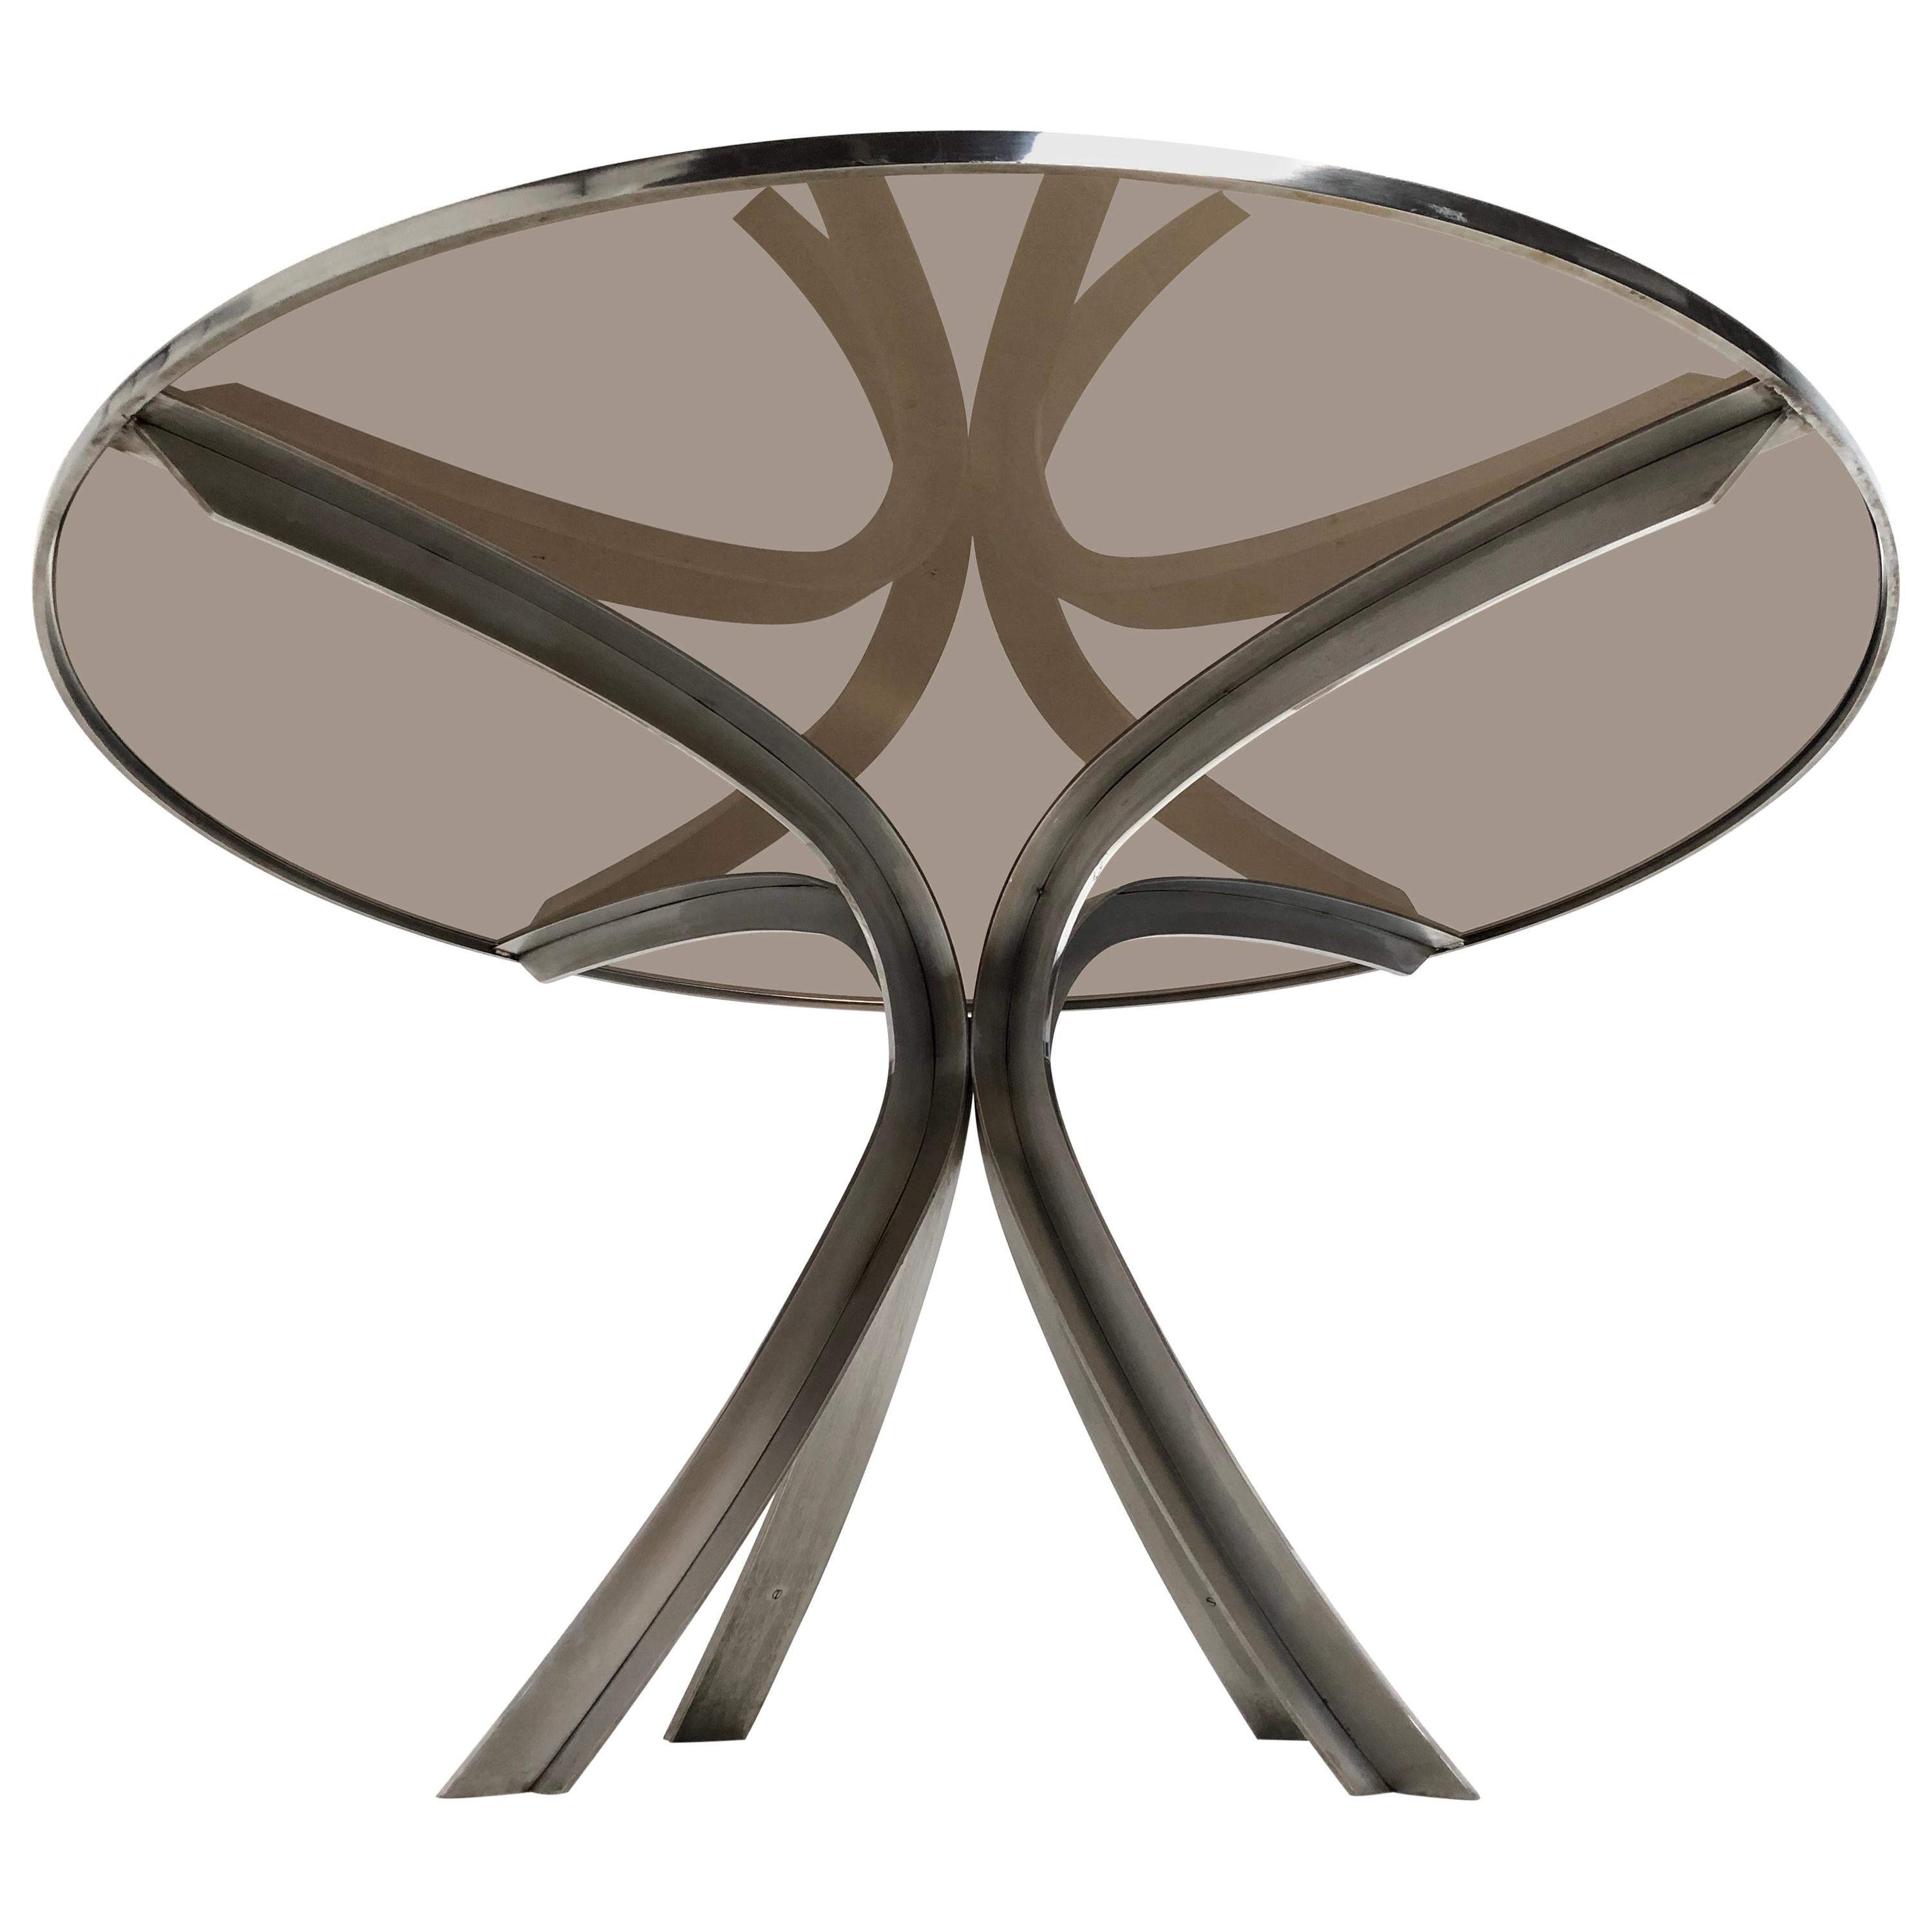 Sculptural Stainless Steel Smoked Glass Dining Table by Xavier Féal 1970, France